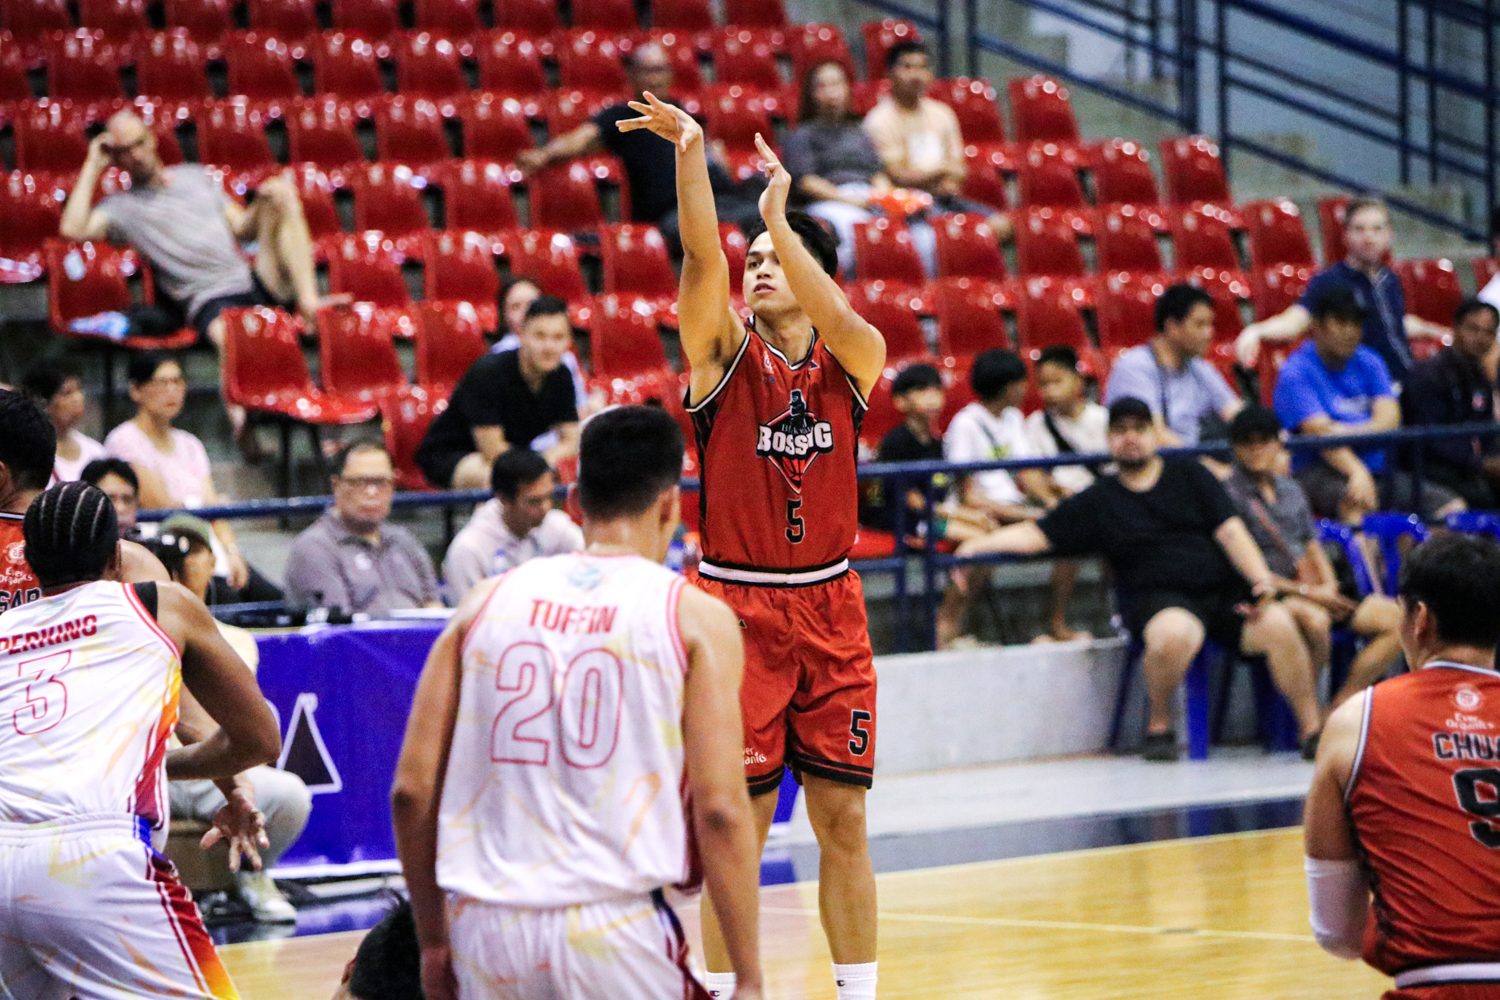 Tungcab-led Blackwater trumps Phoenix, snaps 7-game skid after promising 3-0 start